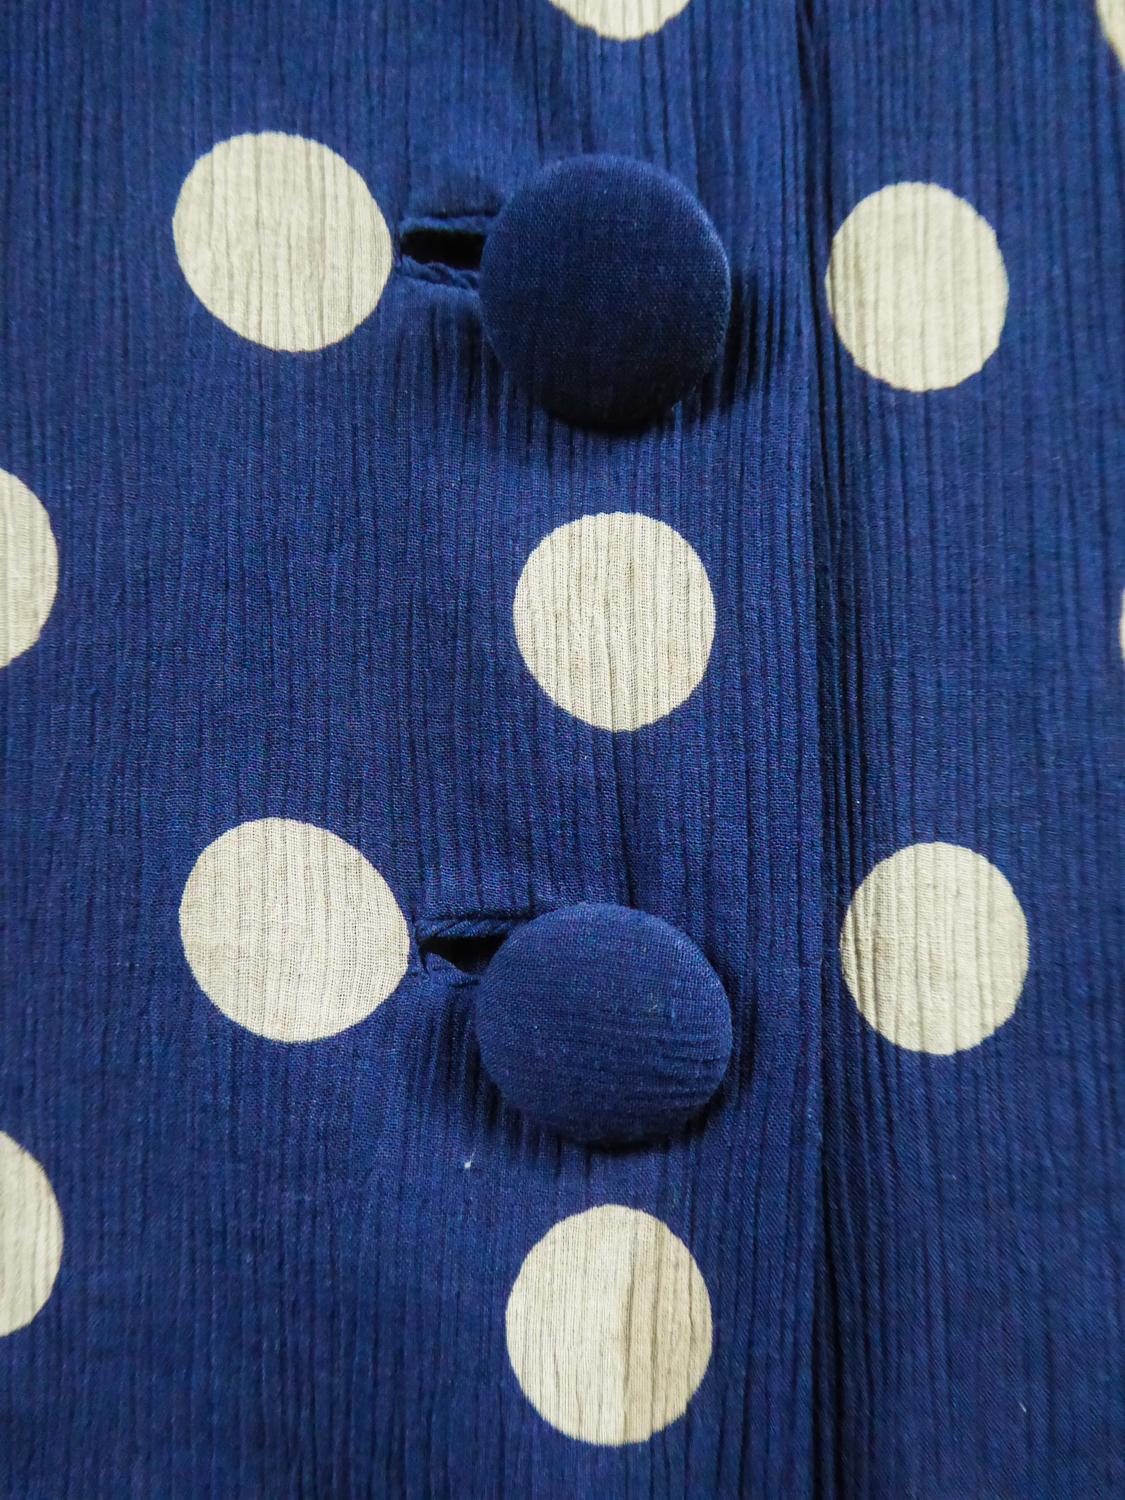 An French Skirt Suit in Polkadot Silk Crepe By F. Dubois Circa 1965 For Sale 1